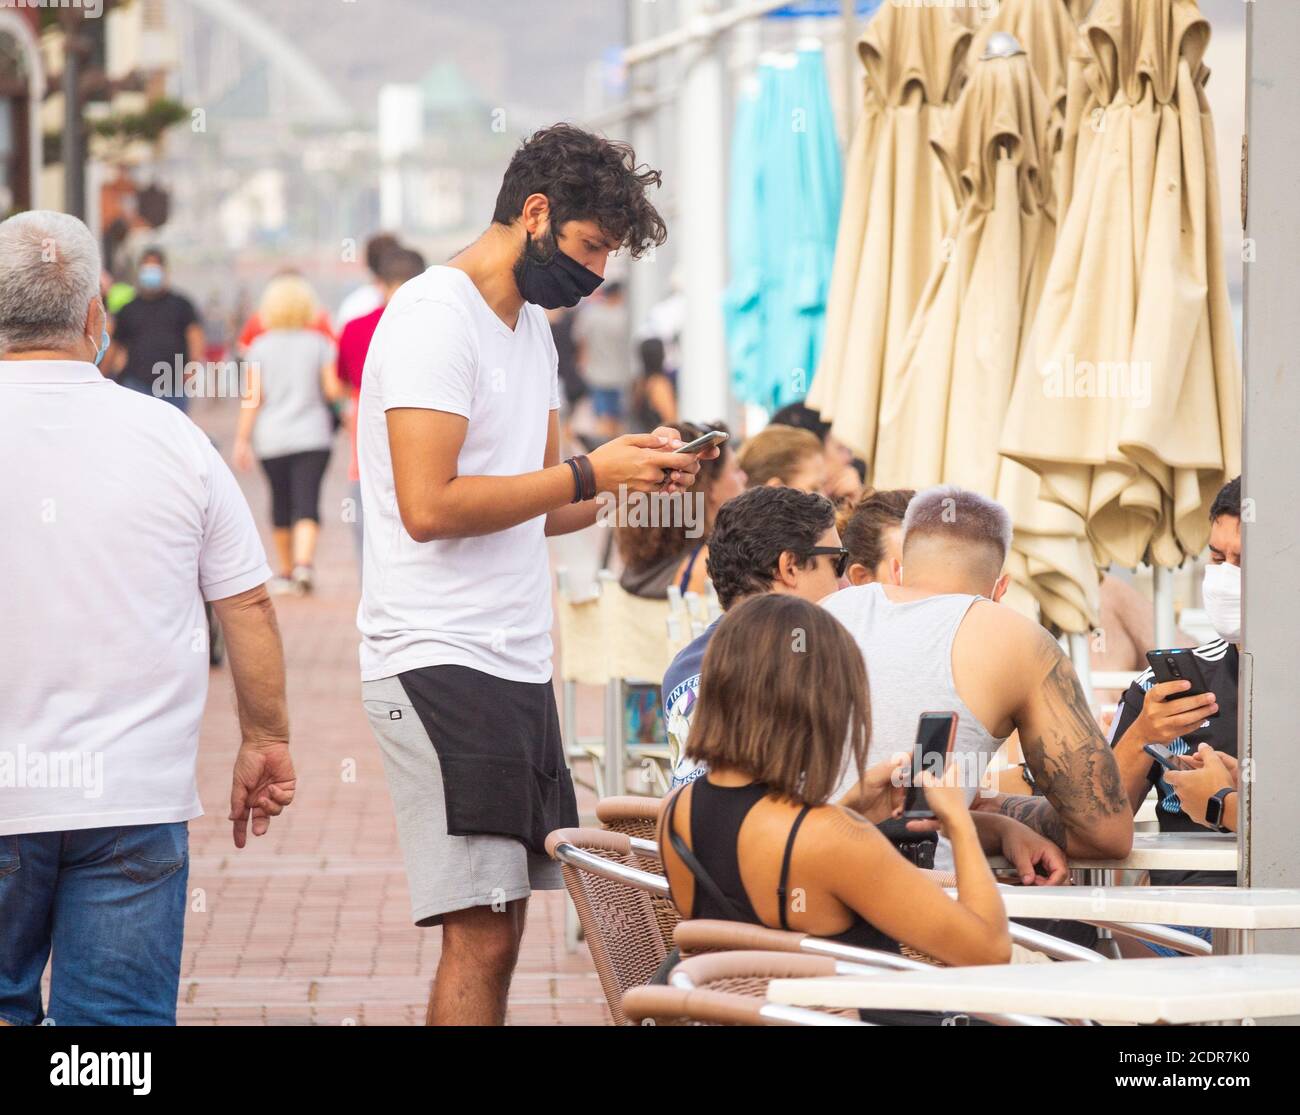 Las Palmas, Gran Canaria, Canary Islands, Spain. 28th August, 2020. Tourists  wearing face masks on the city beach in Las Palmas on Gran Canaria. The Canary Islands have seen a huge spike in Coronavirus infections in August, with Las Palmas registering the most cases. Credit: Alan Dawson/Alamy Live News Stock Photo